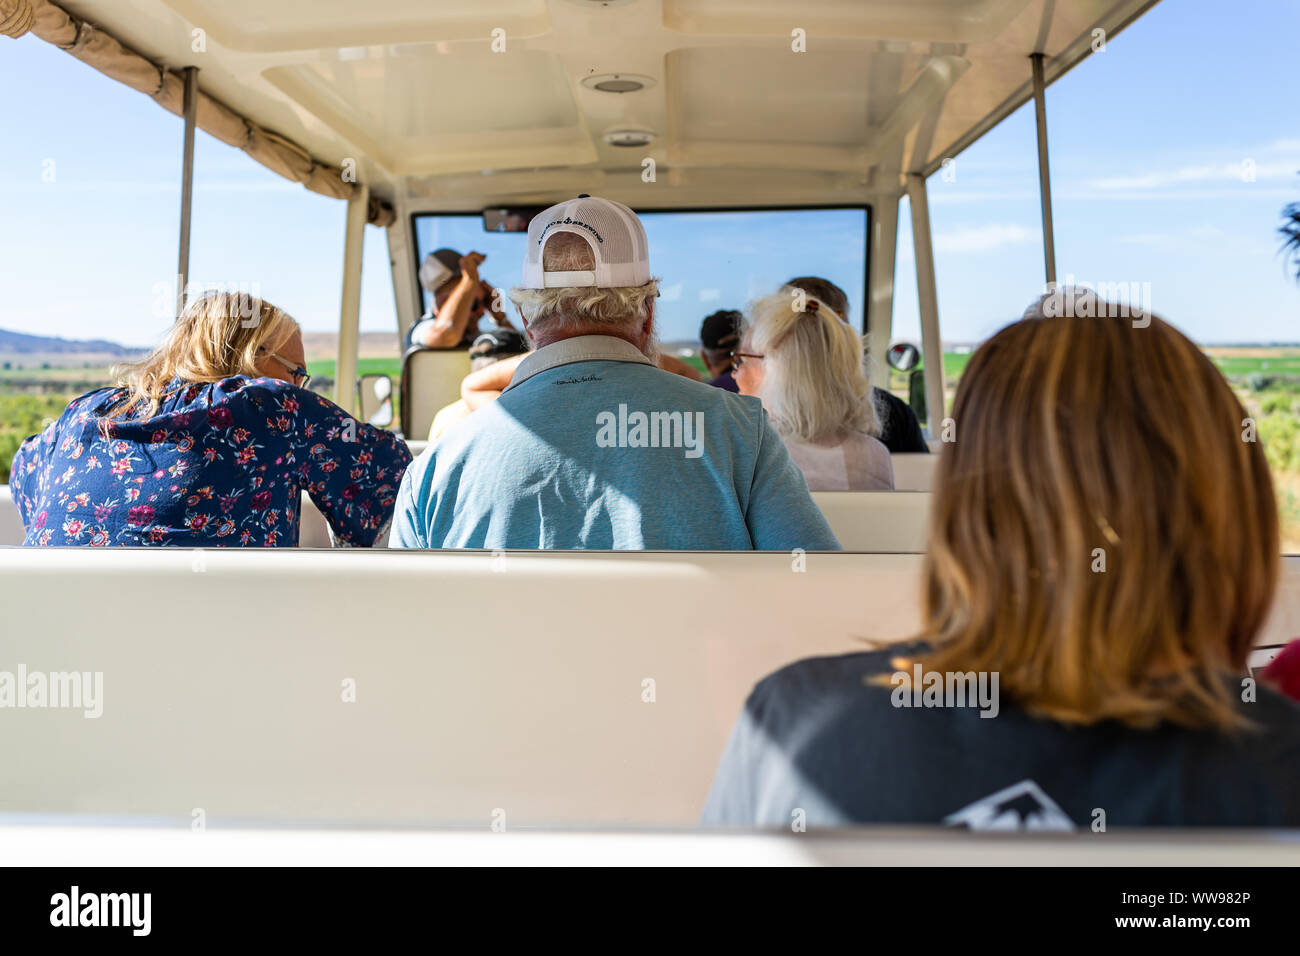 Jensen, USA - July 23, 2019: Quarry visitor center in Dinosaur National Monument Park with people on shuttle to exhibit hall in Utah Stock Photo